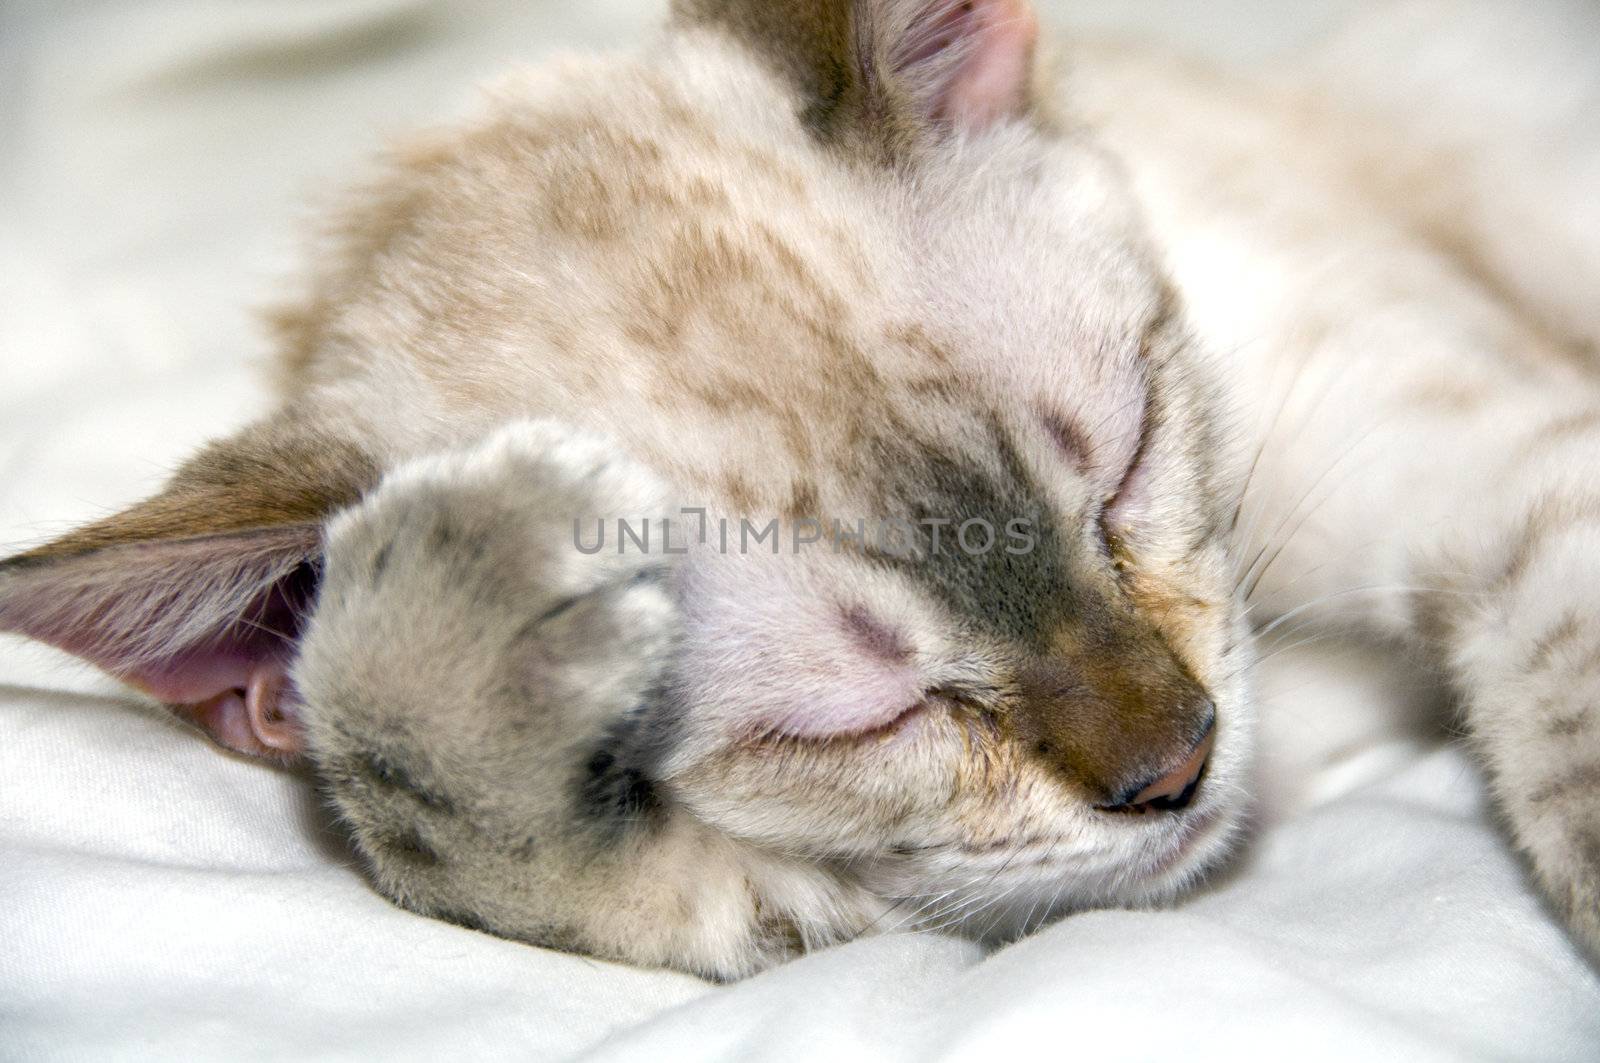 A young Bengal kitten sleeping on a white bed